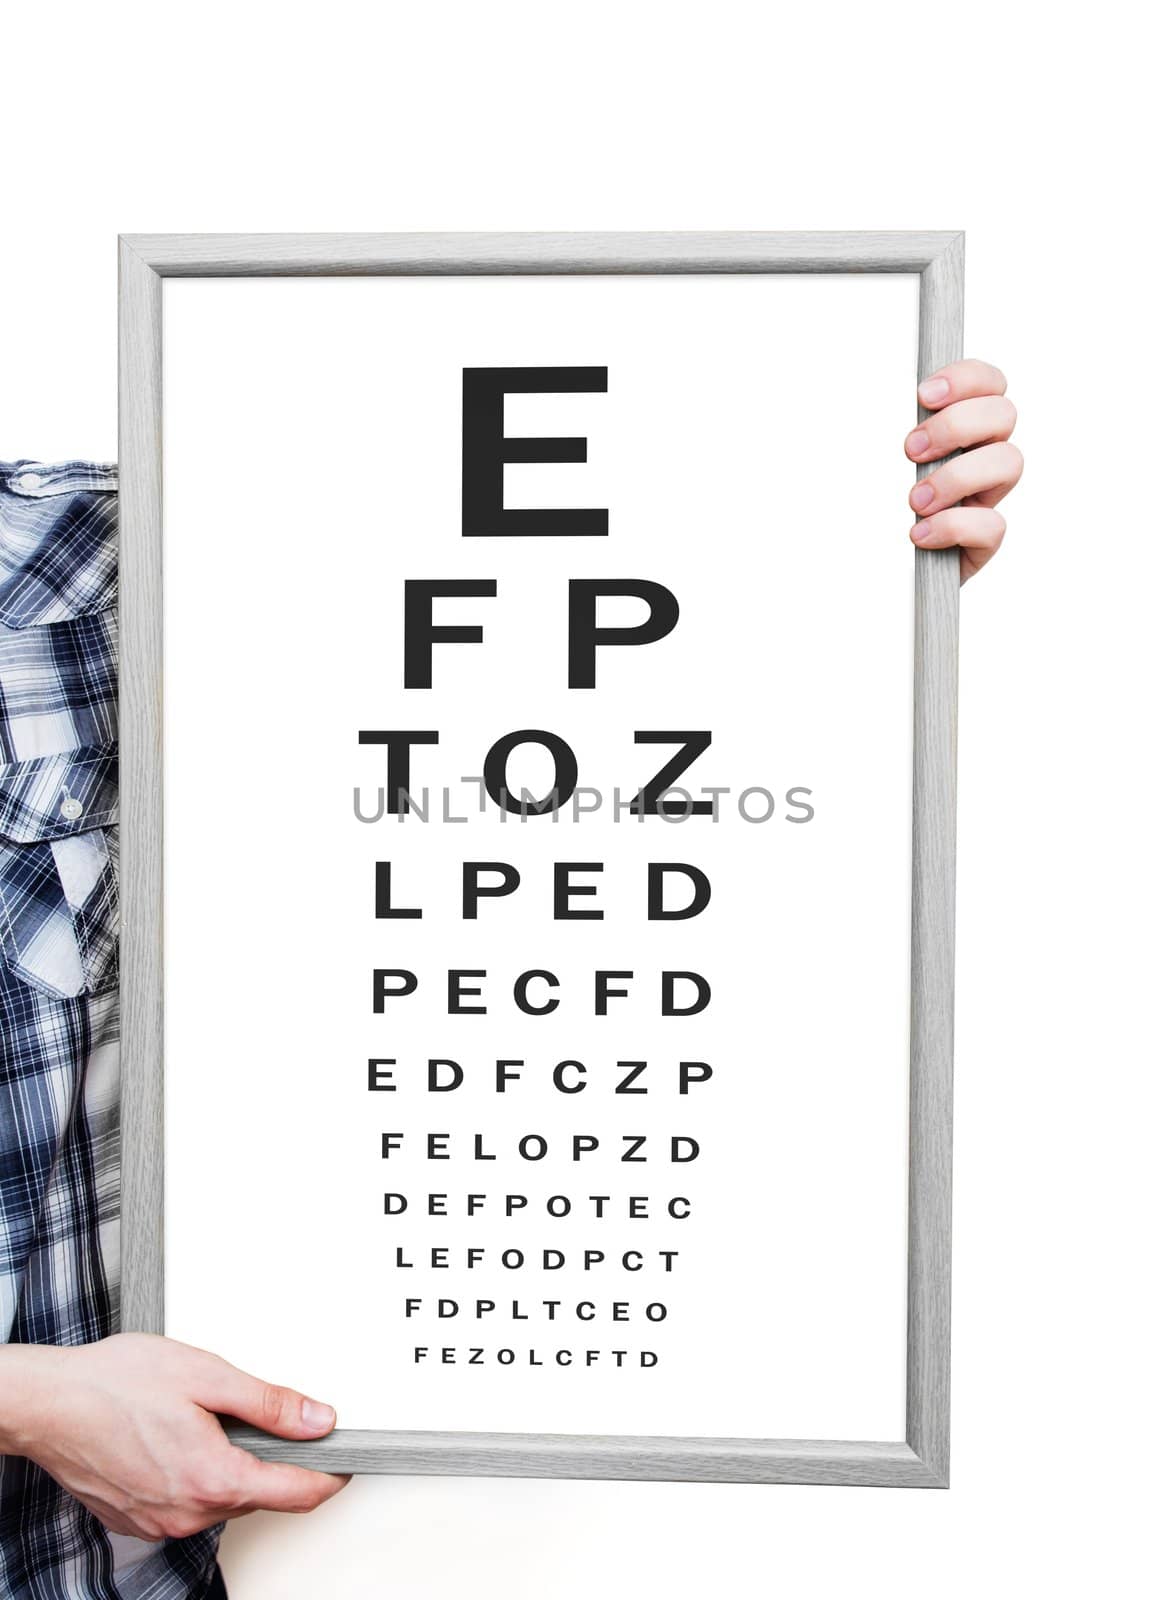 Man showing Snellen eye exam chart on white background by simpson33